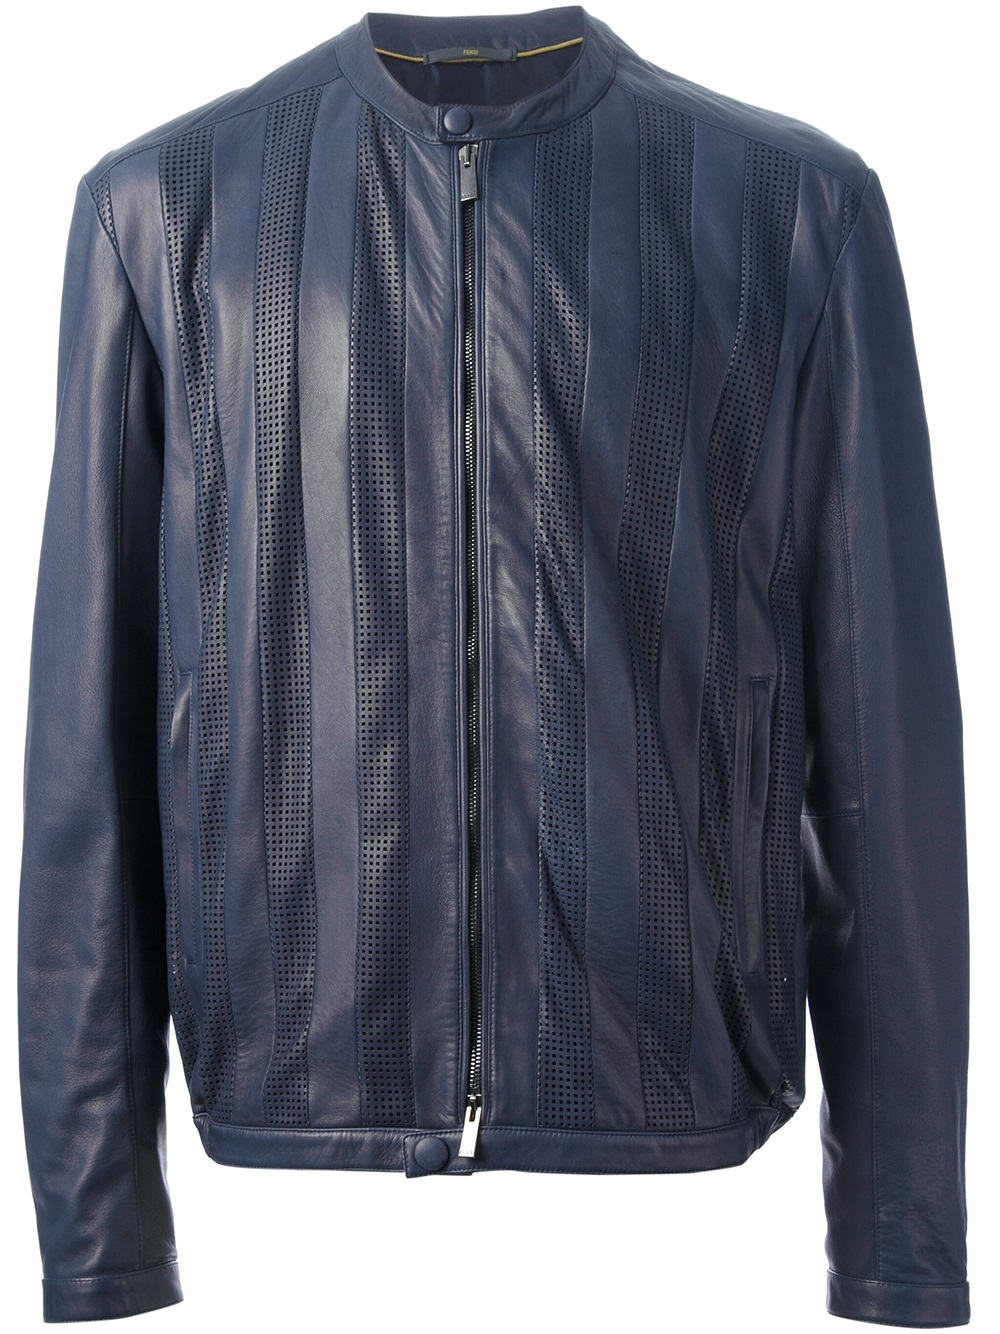 Fendi Perforated Leather Jacket in Blue for Men - Lyst